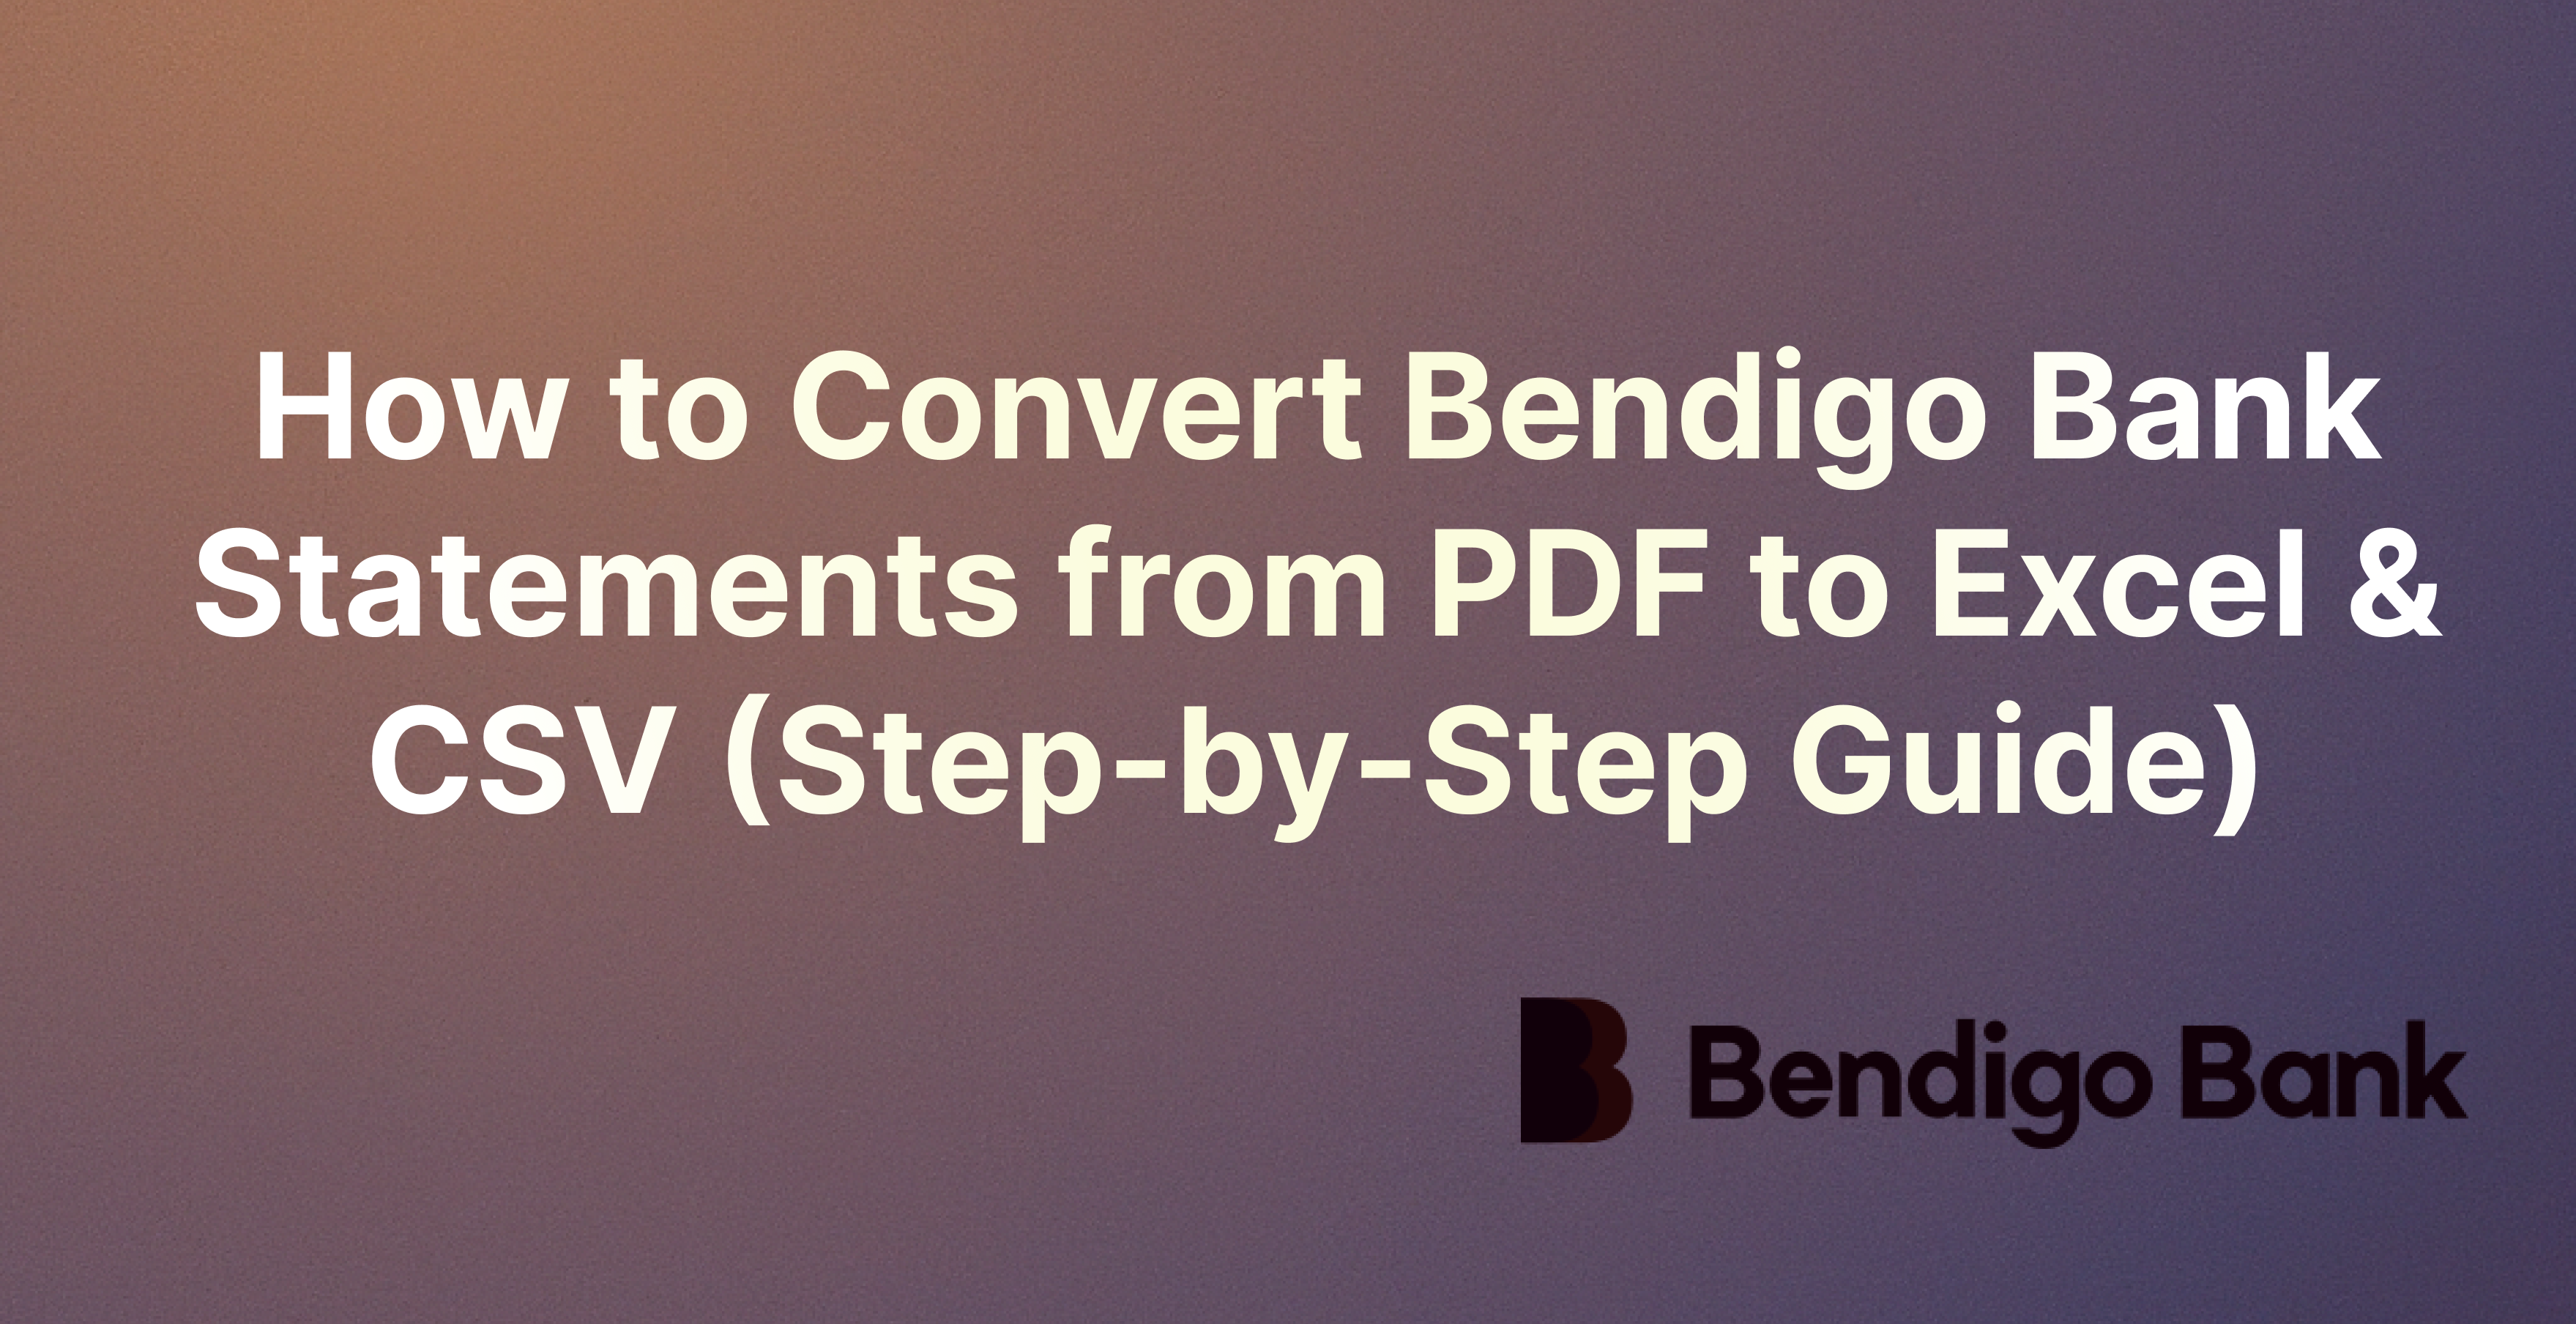 How to Convert Bendigo Bank Statements from PDF to Excel & CSV (Step-by-Step Guide)